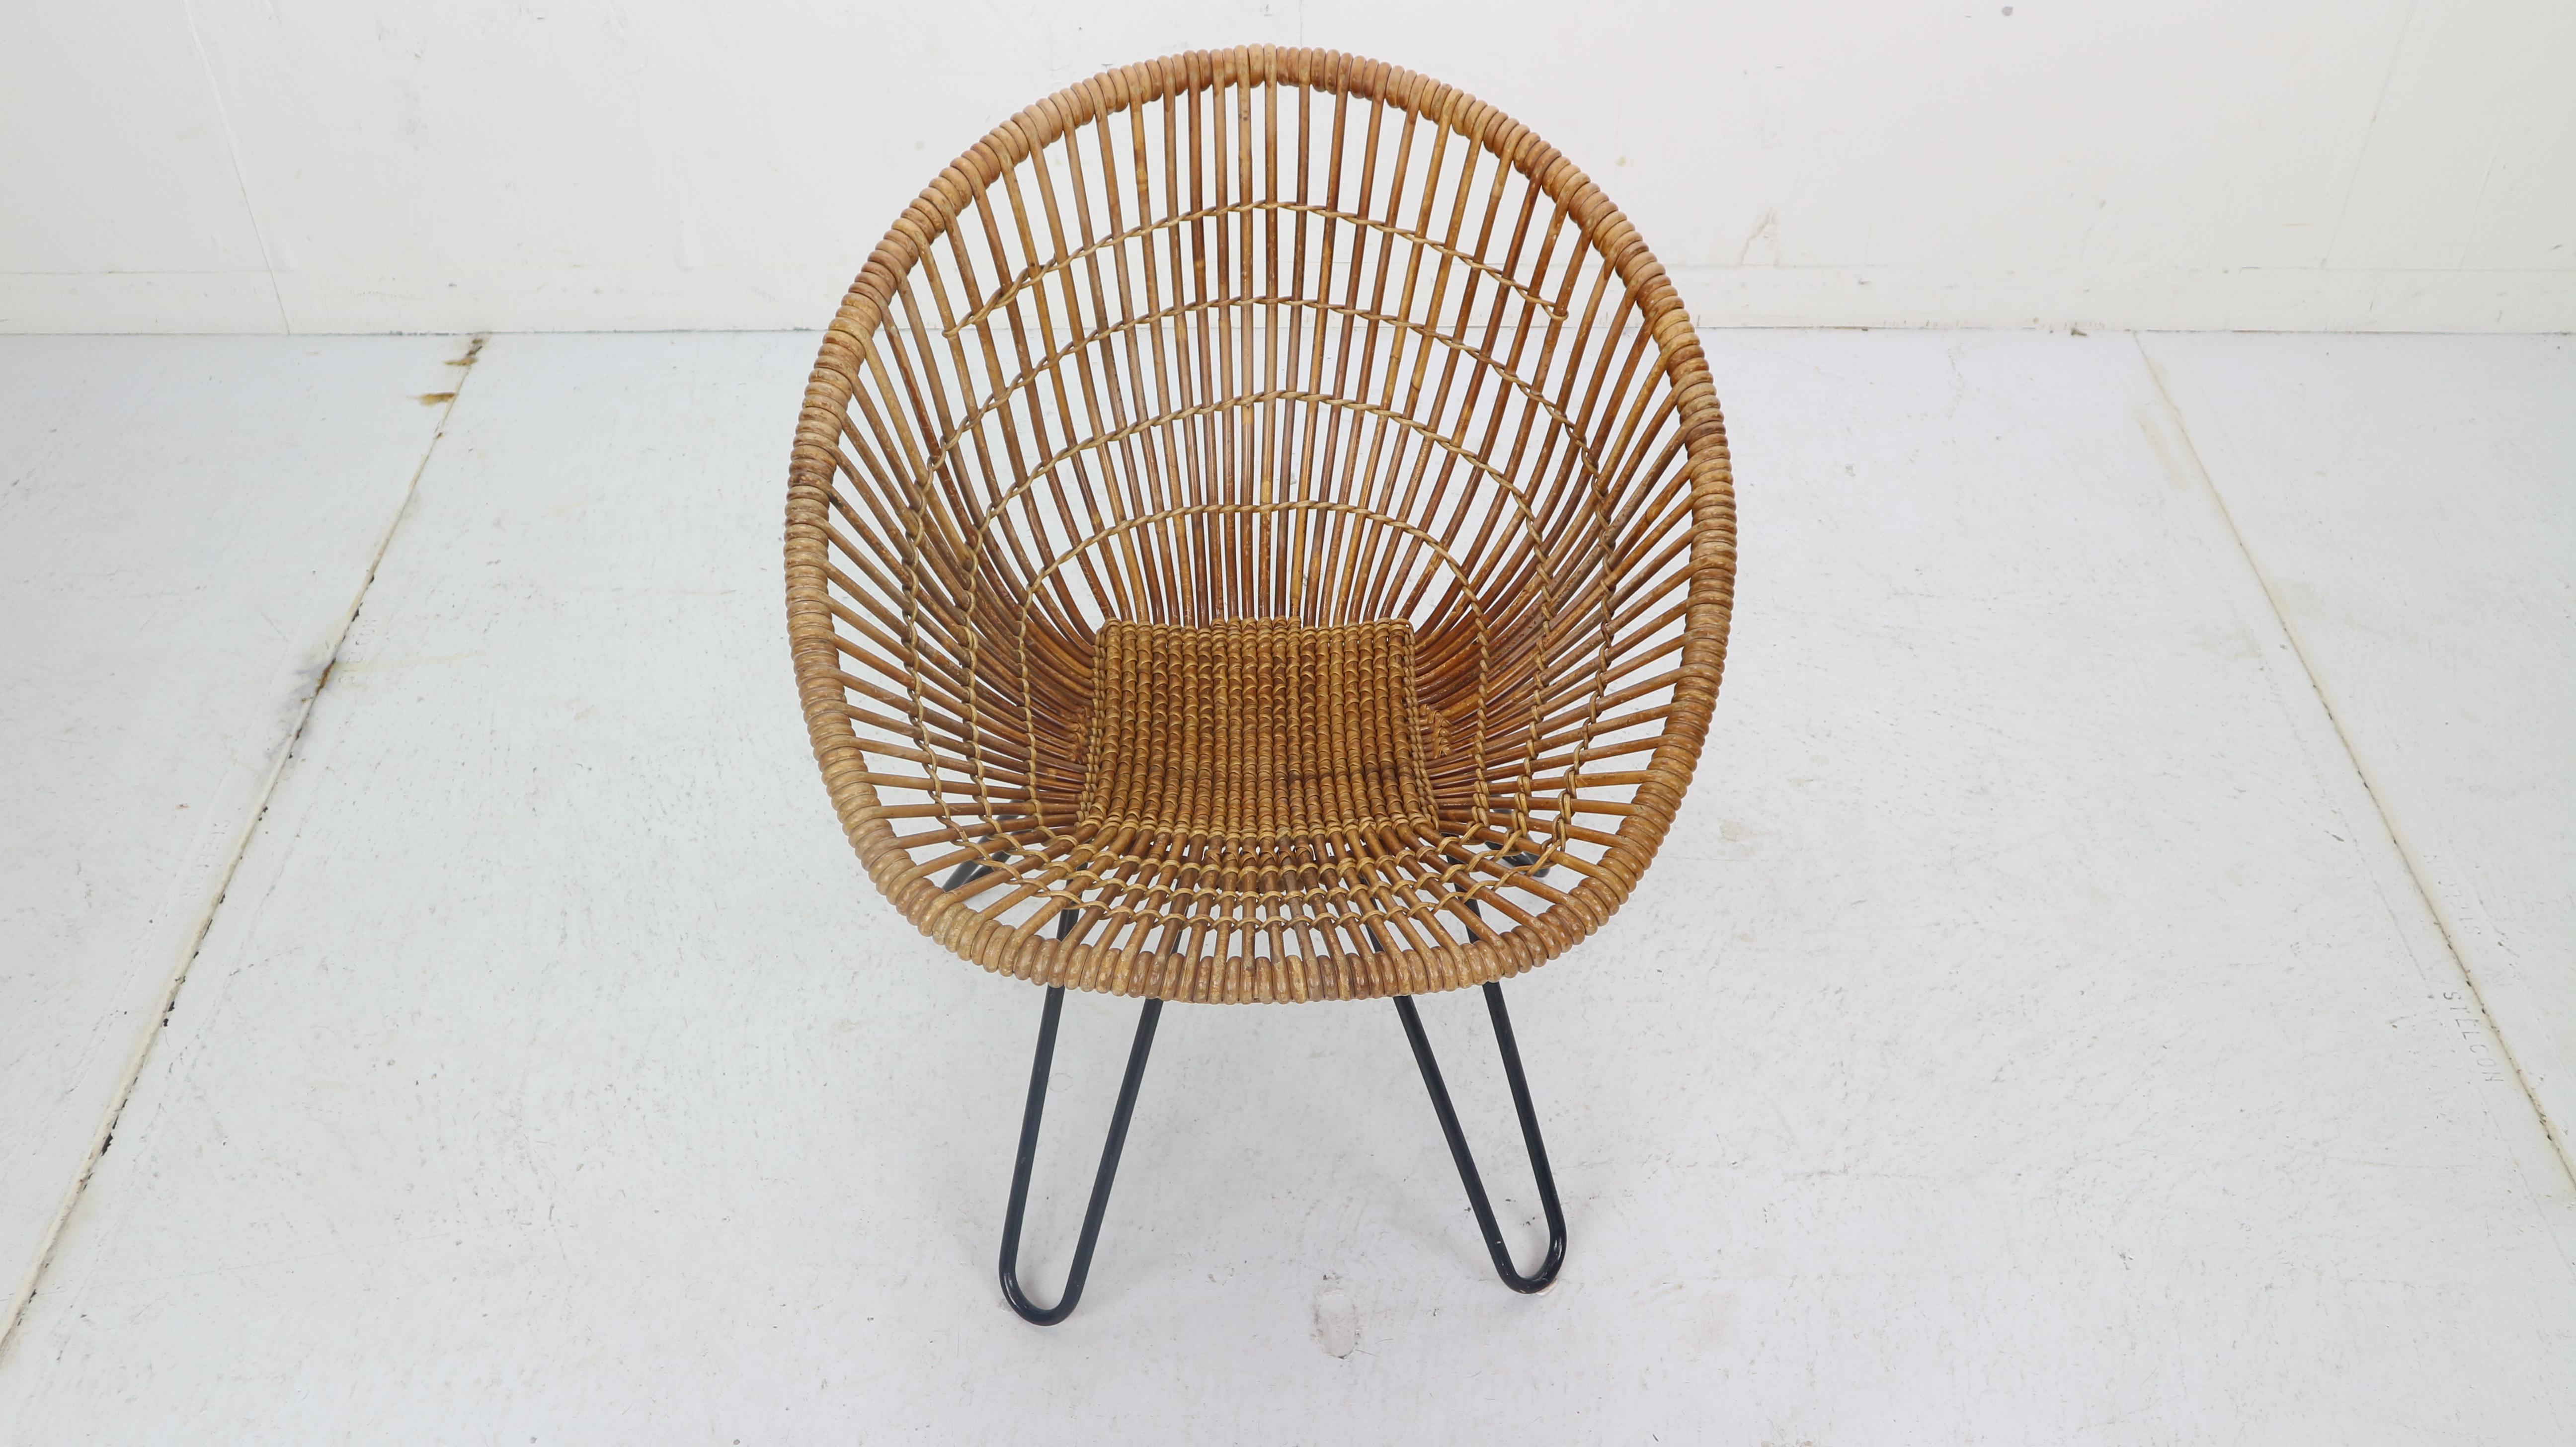 Beautiful lounge chair witch can be used for inside and outside.
Made in 1950s period The Netherlands. 
Minimalistic chair is made of woven rattan base ( has a small damage due to it's vintage age and use, please see the pictures) and strong black